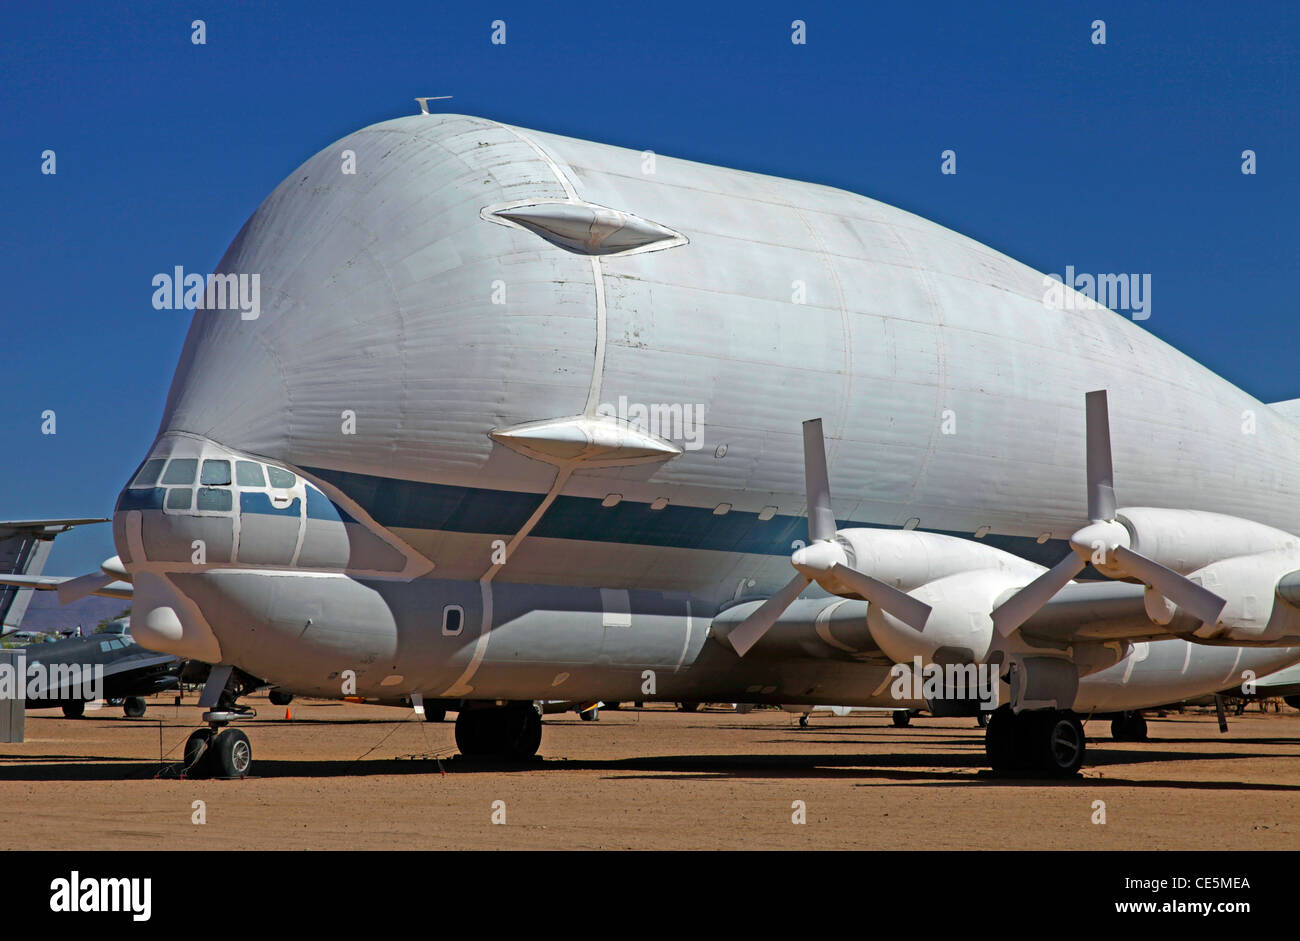 The Super Guppy Cargo Aircraft of NASA on display at Pima Museum Stock Photo